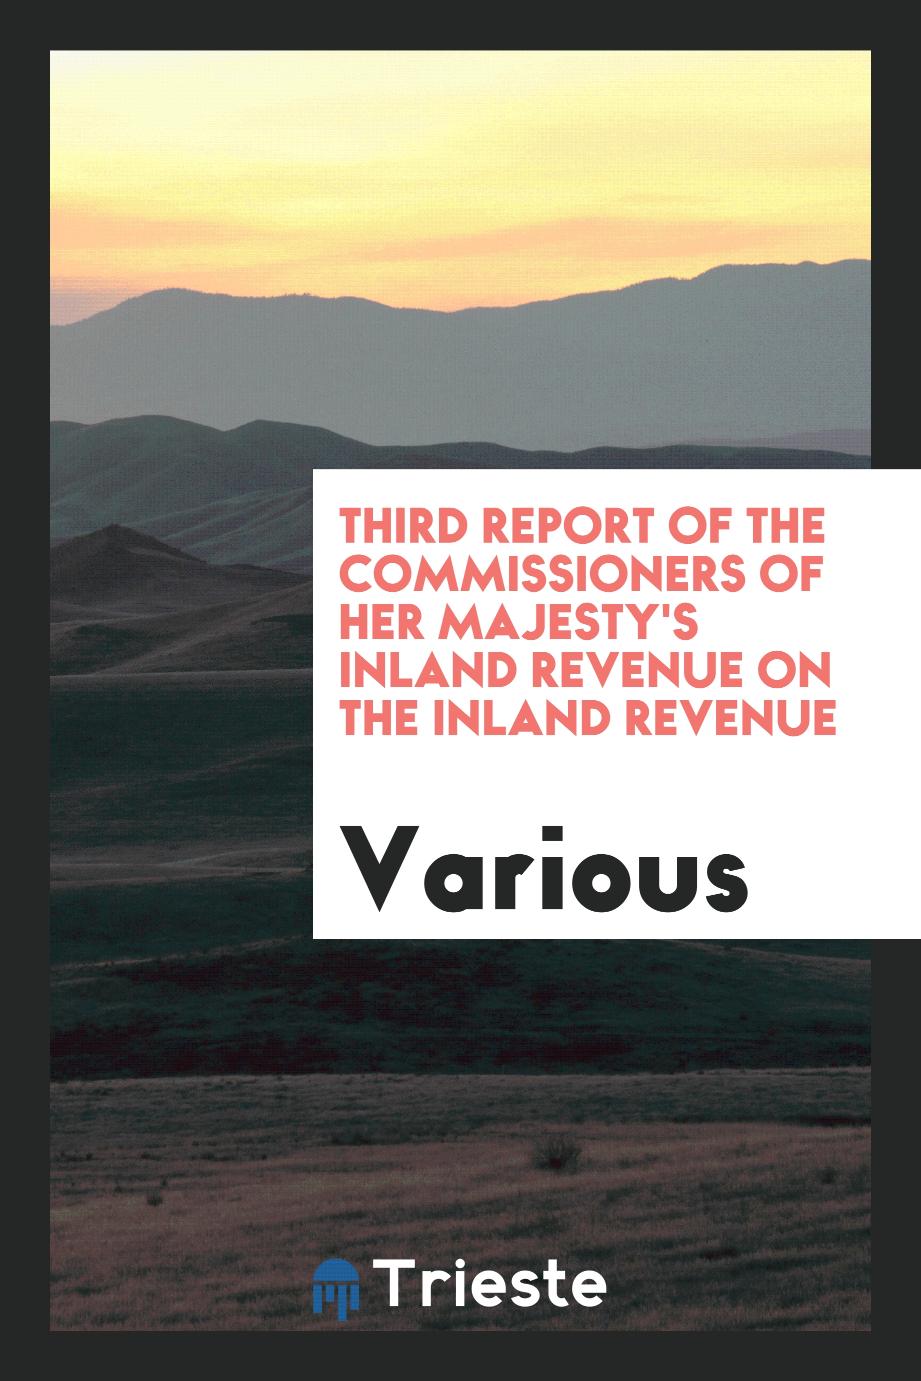 Third Report of the Commissioners of Her Majesty's Inland Revenue on the Inland revenue